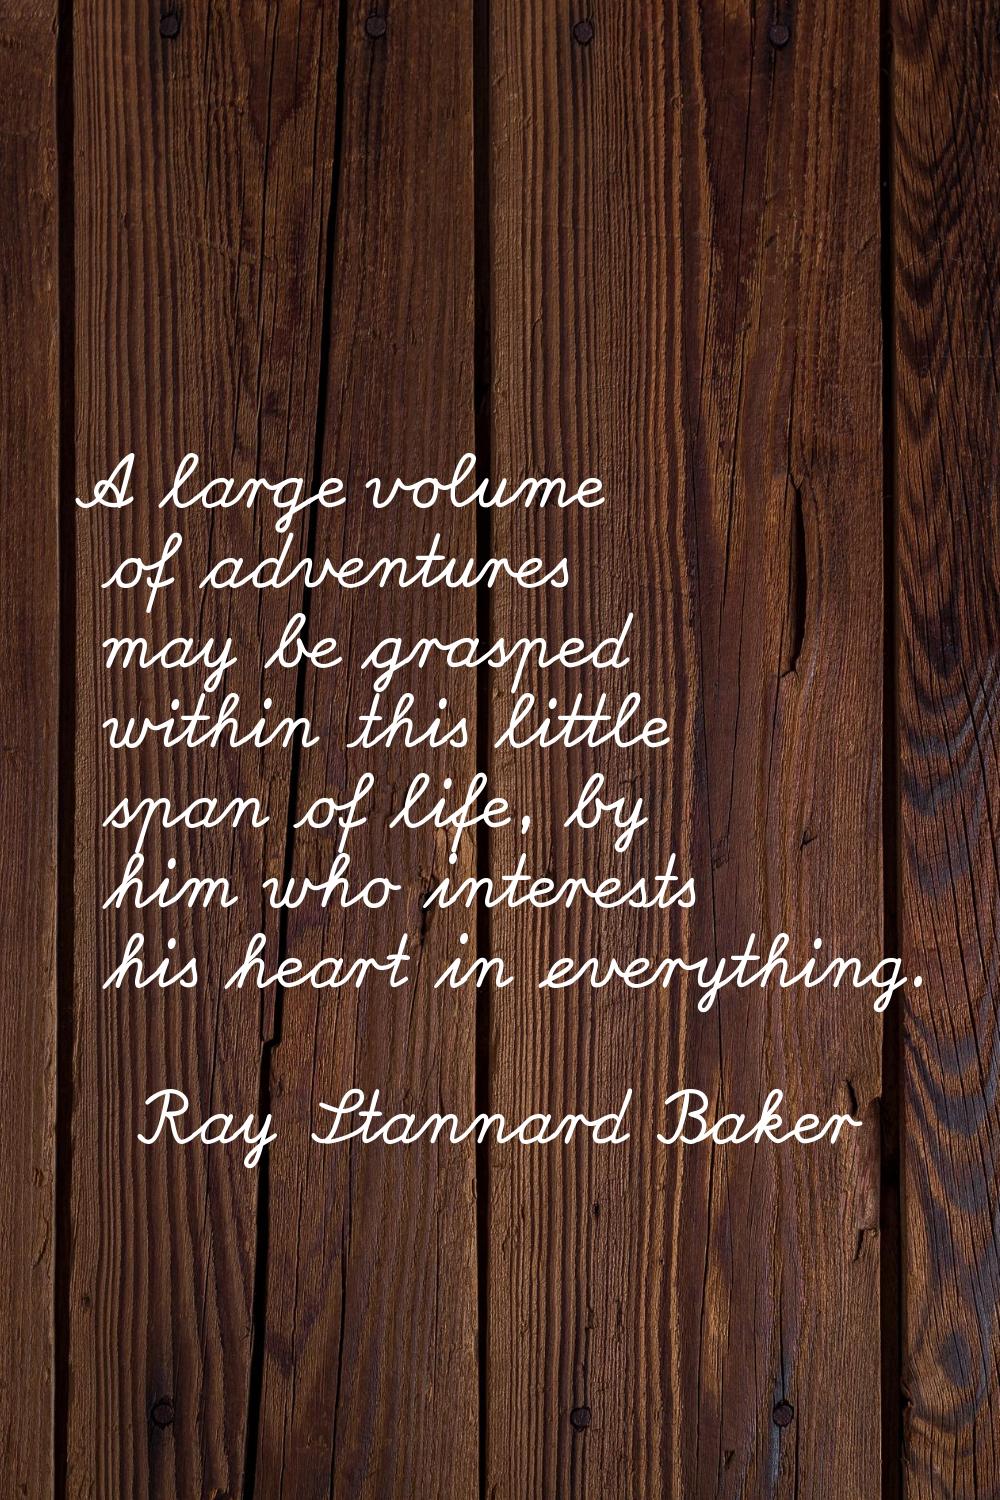 A large volume of adventures may be grasped within this little span of life, by him who interests h